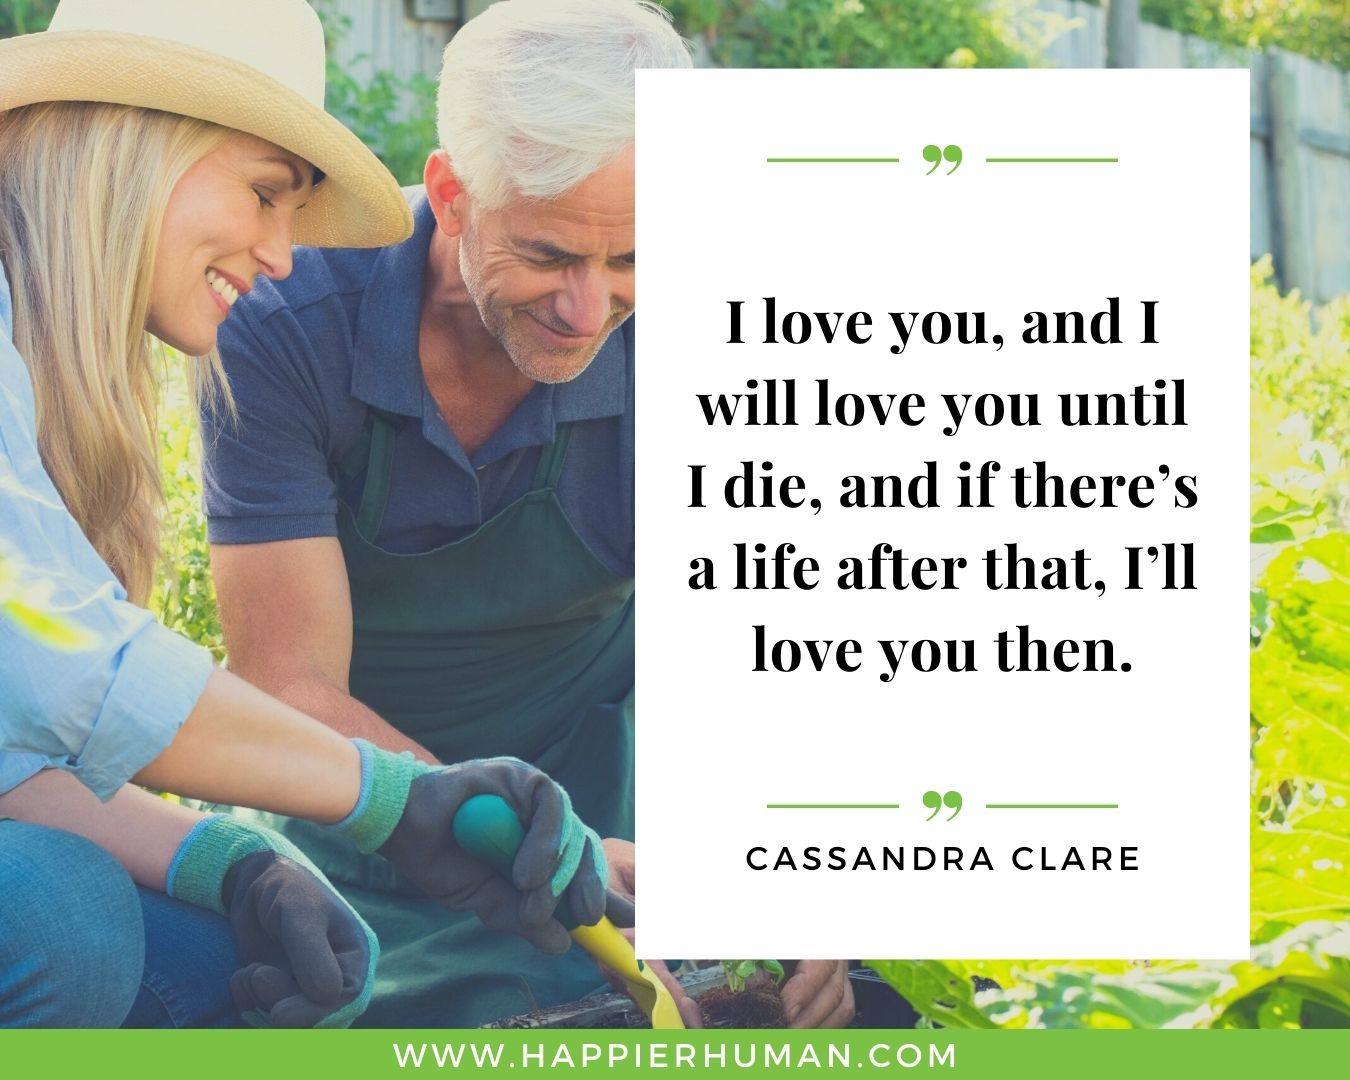 Unconditional Love Quotes for Women- “I love you, and I will love you until I die, and if there’s a life after that, I’ll love you then.” – Cassandra Clare